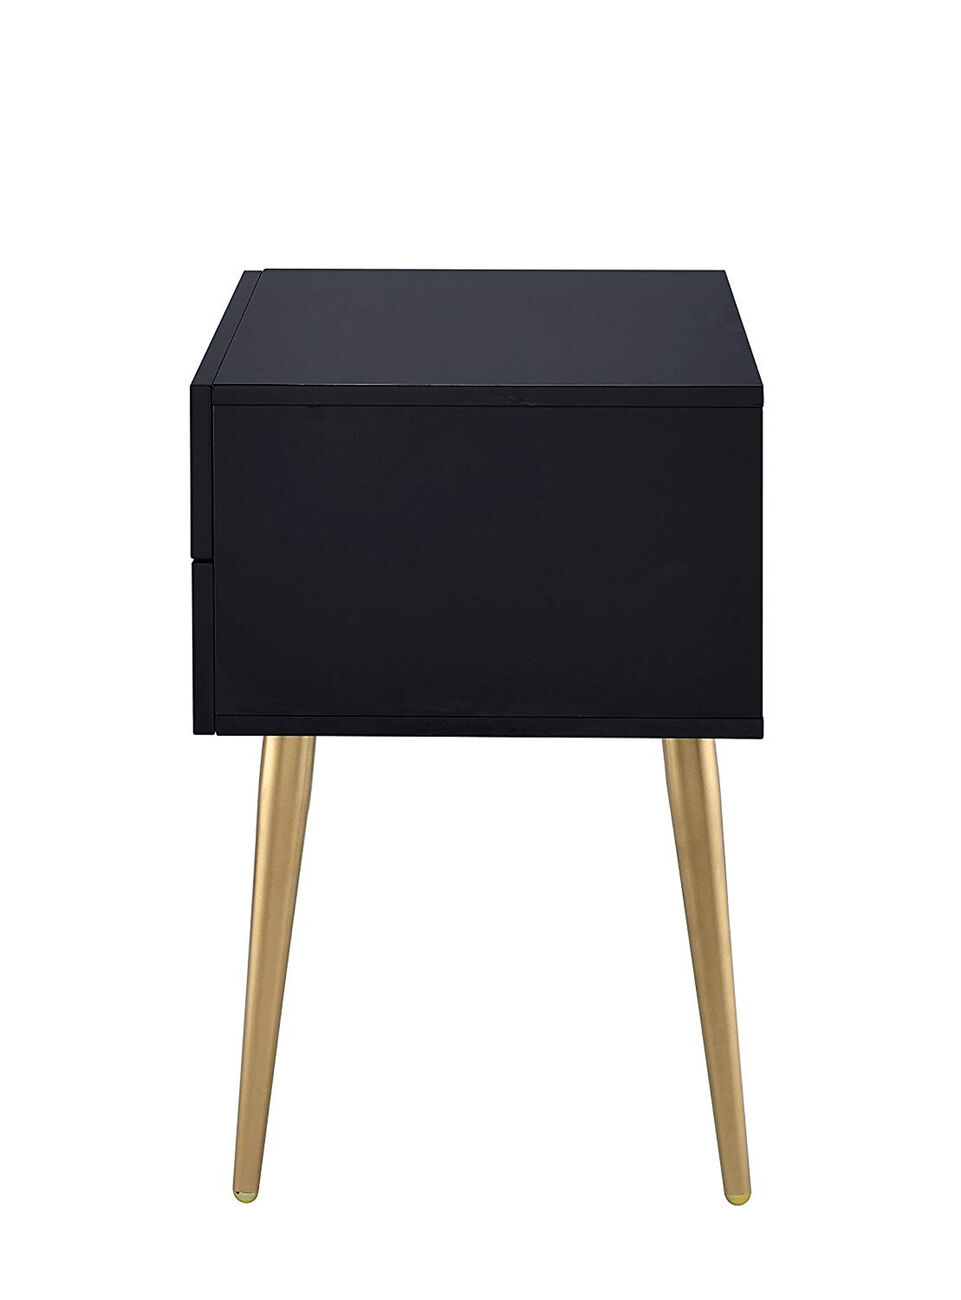 Denvor Square End Table with Drawers, Black & Gold